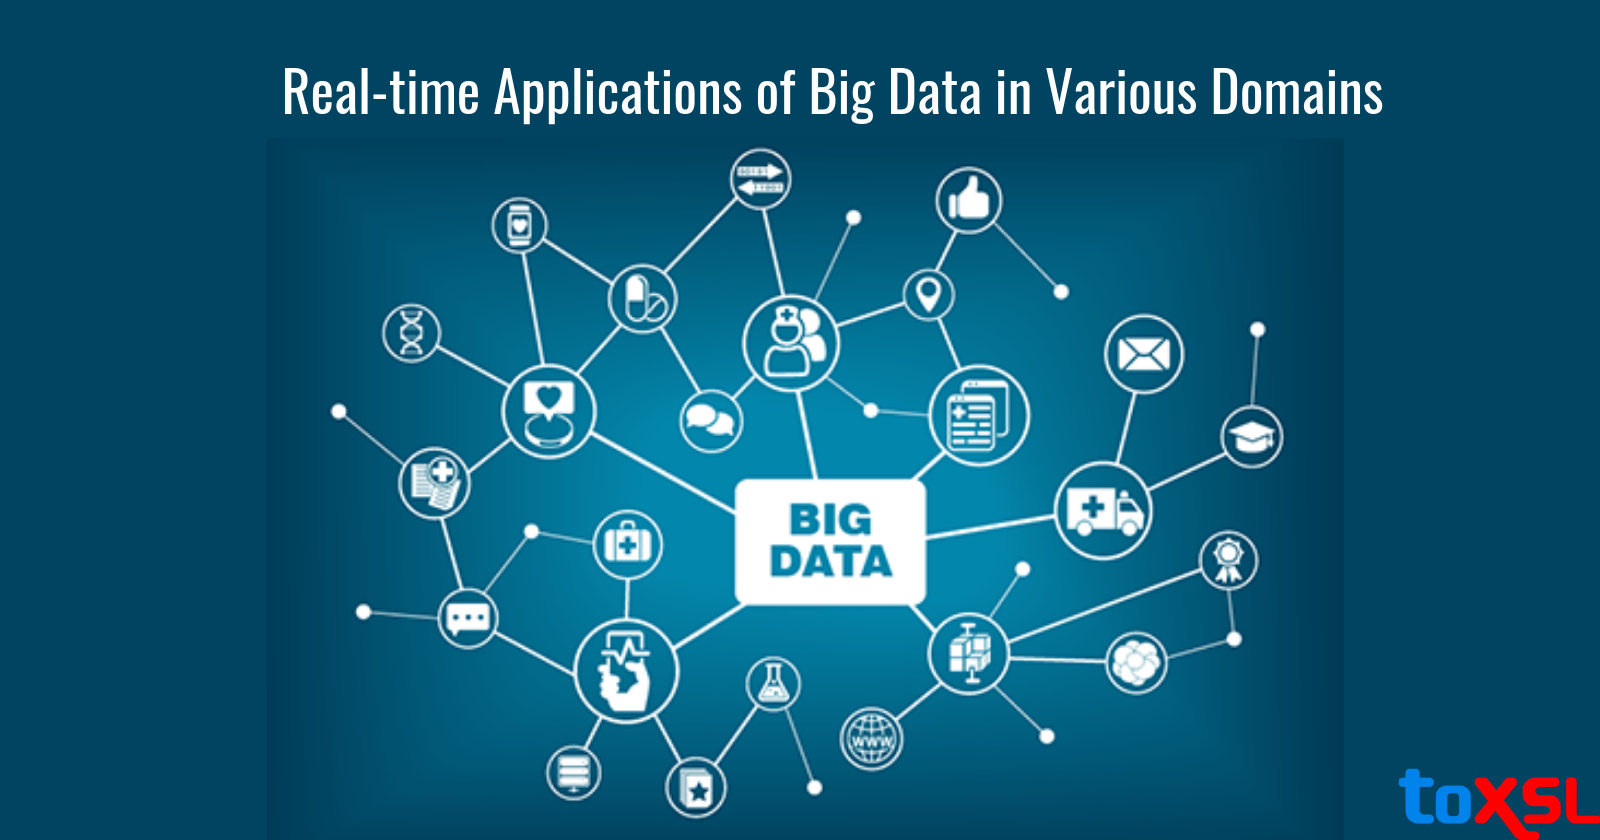 How Big Data Will Influence Various Domains in the Coming Future